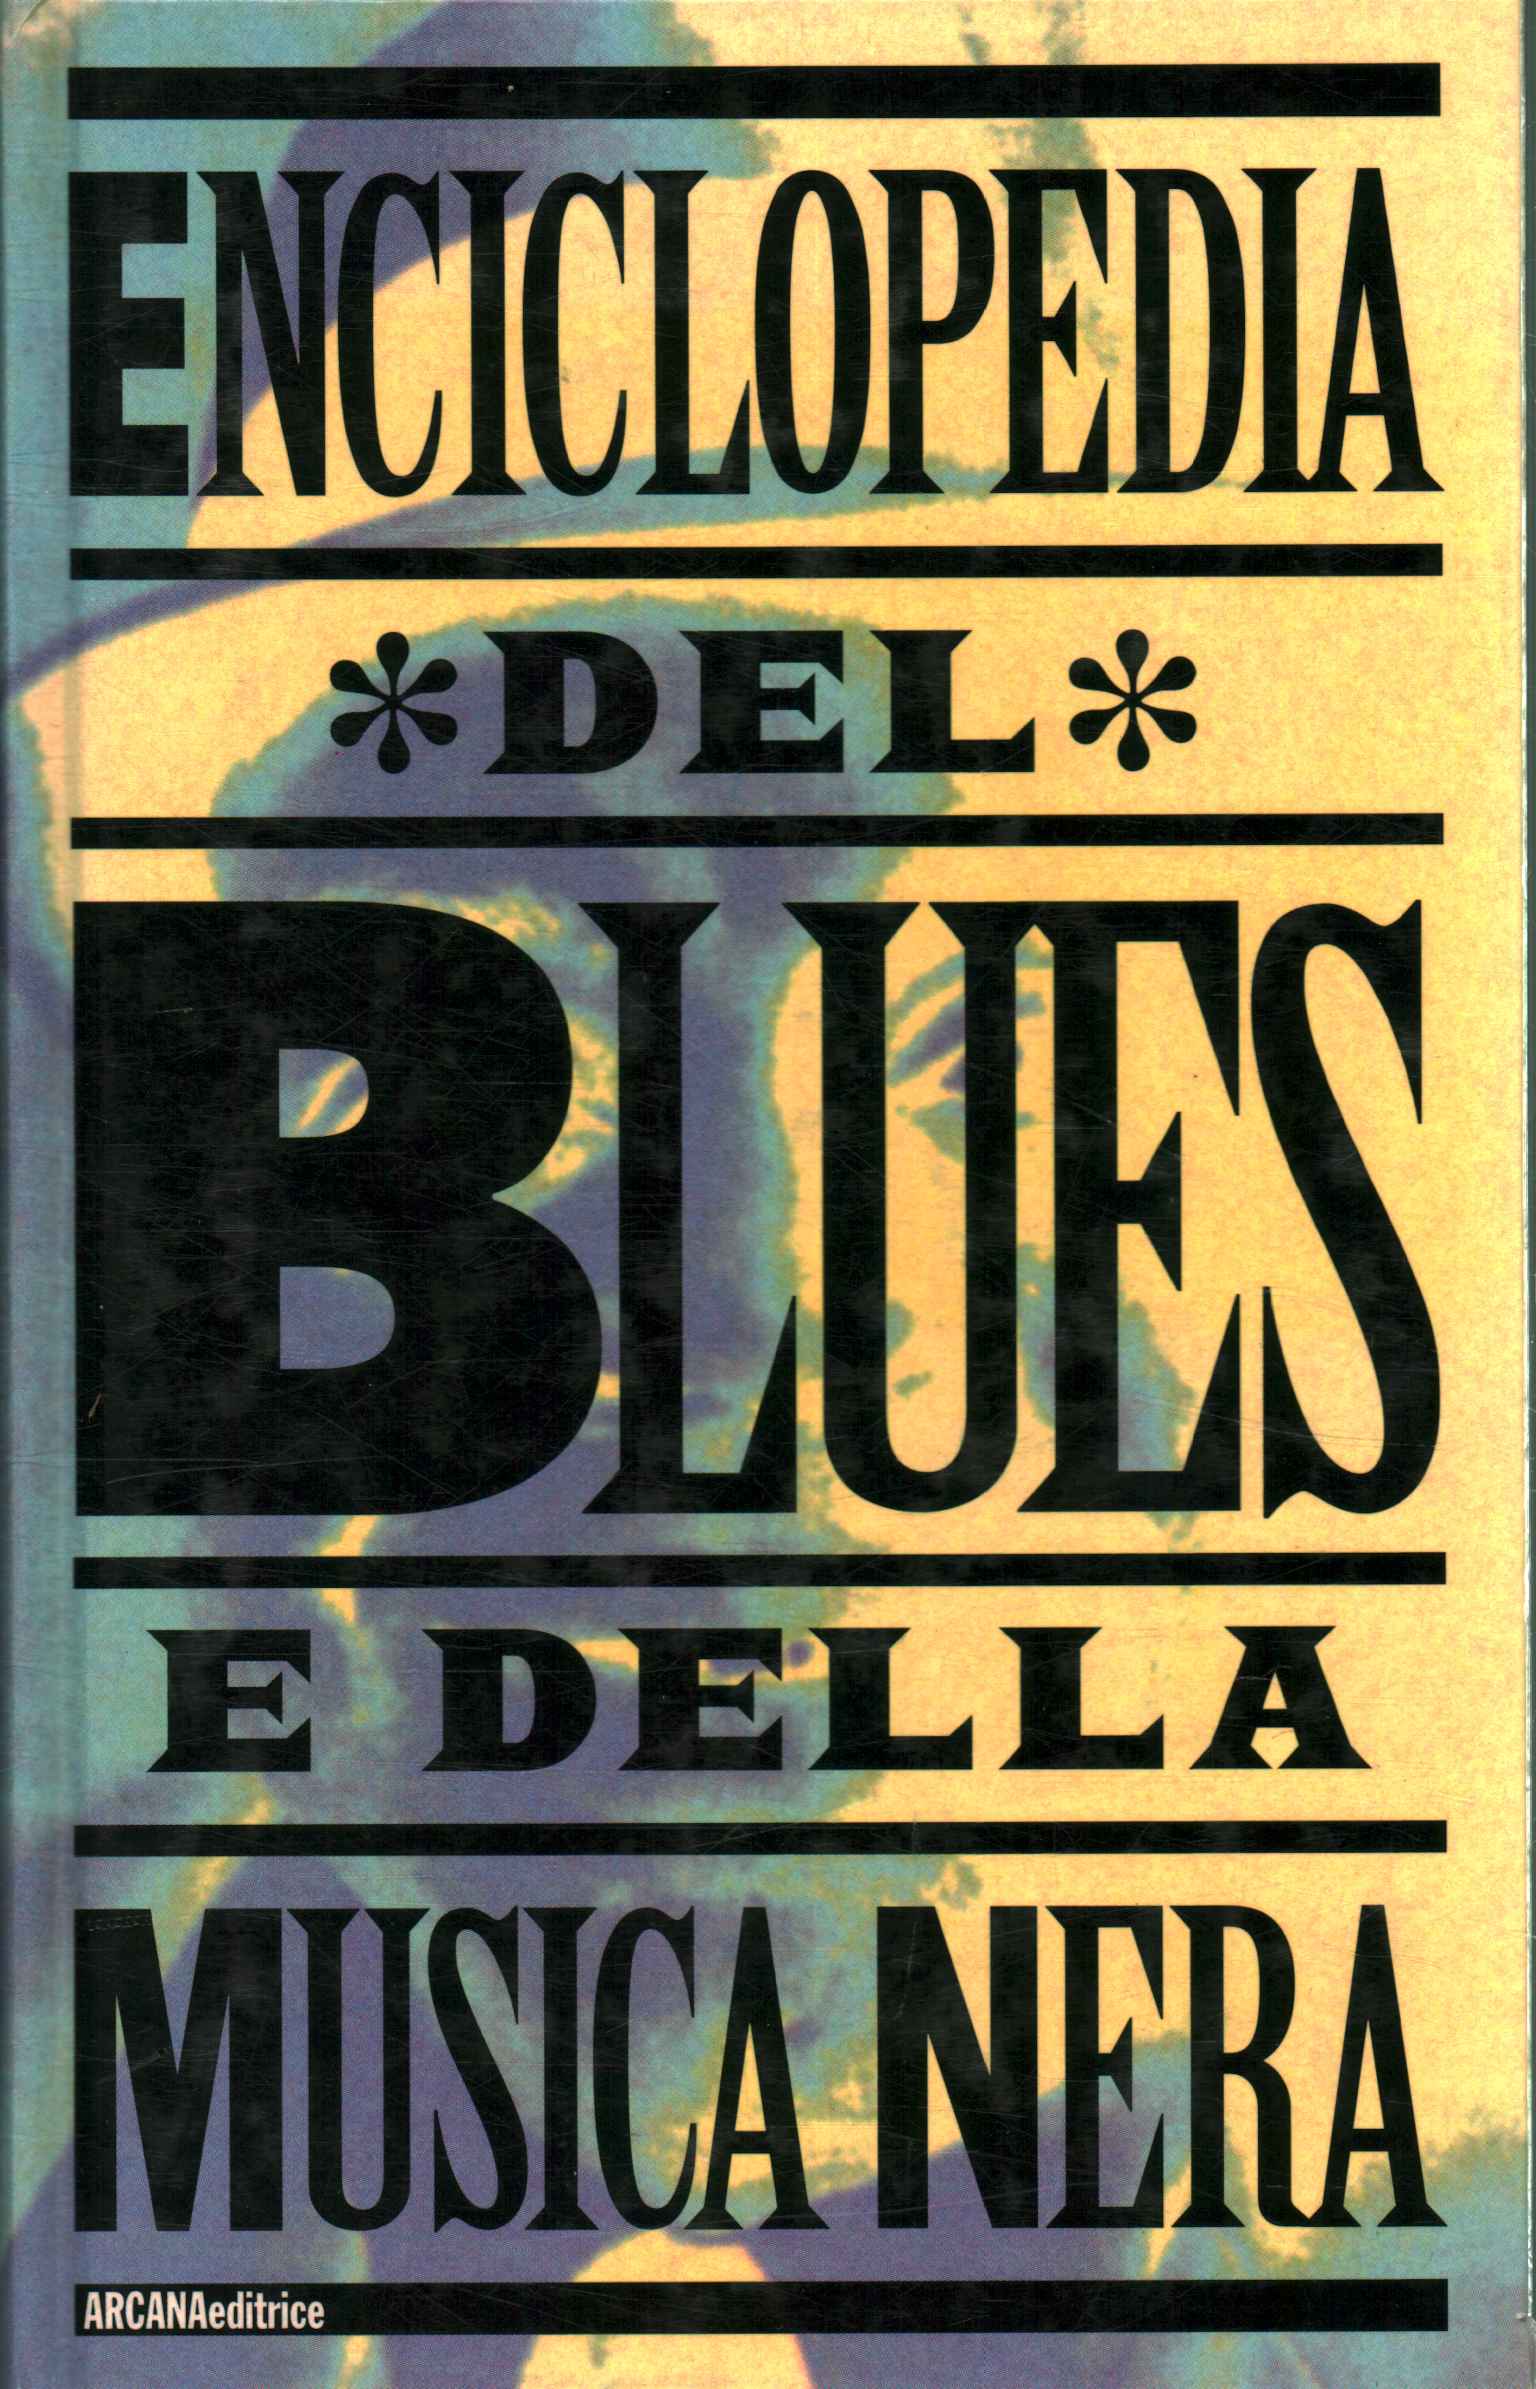 Encyclopedia of blues and music